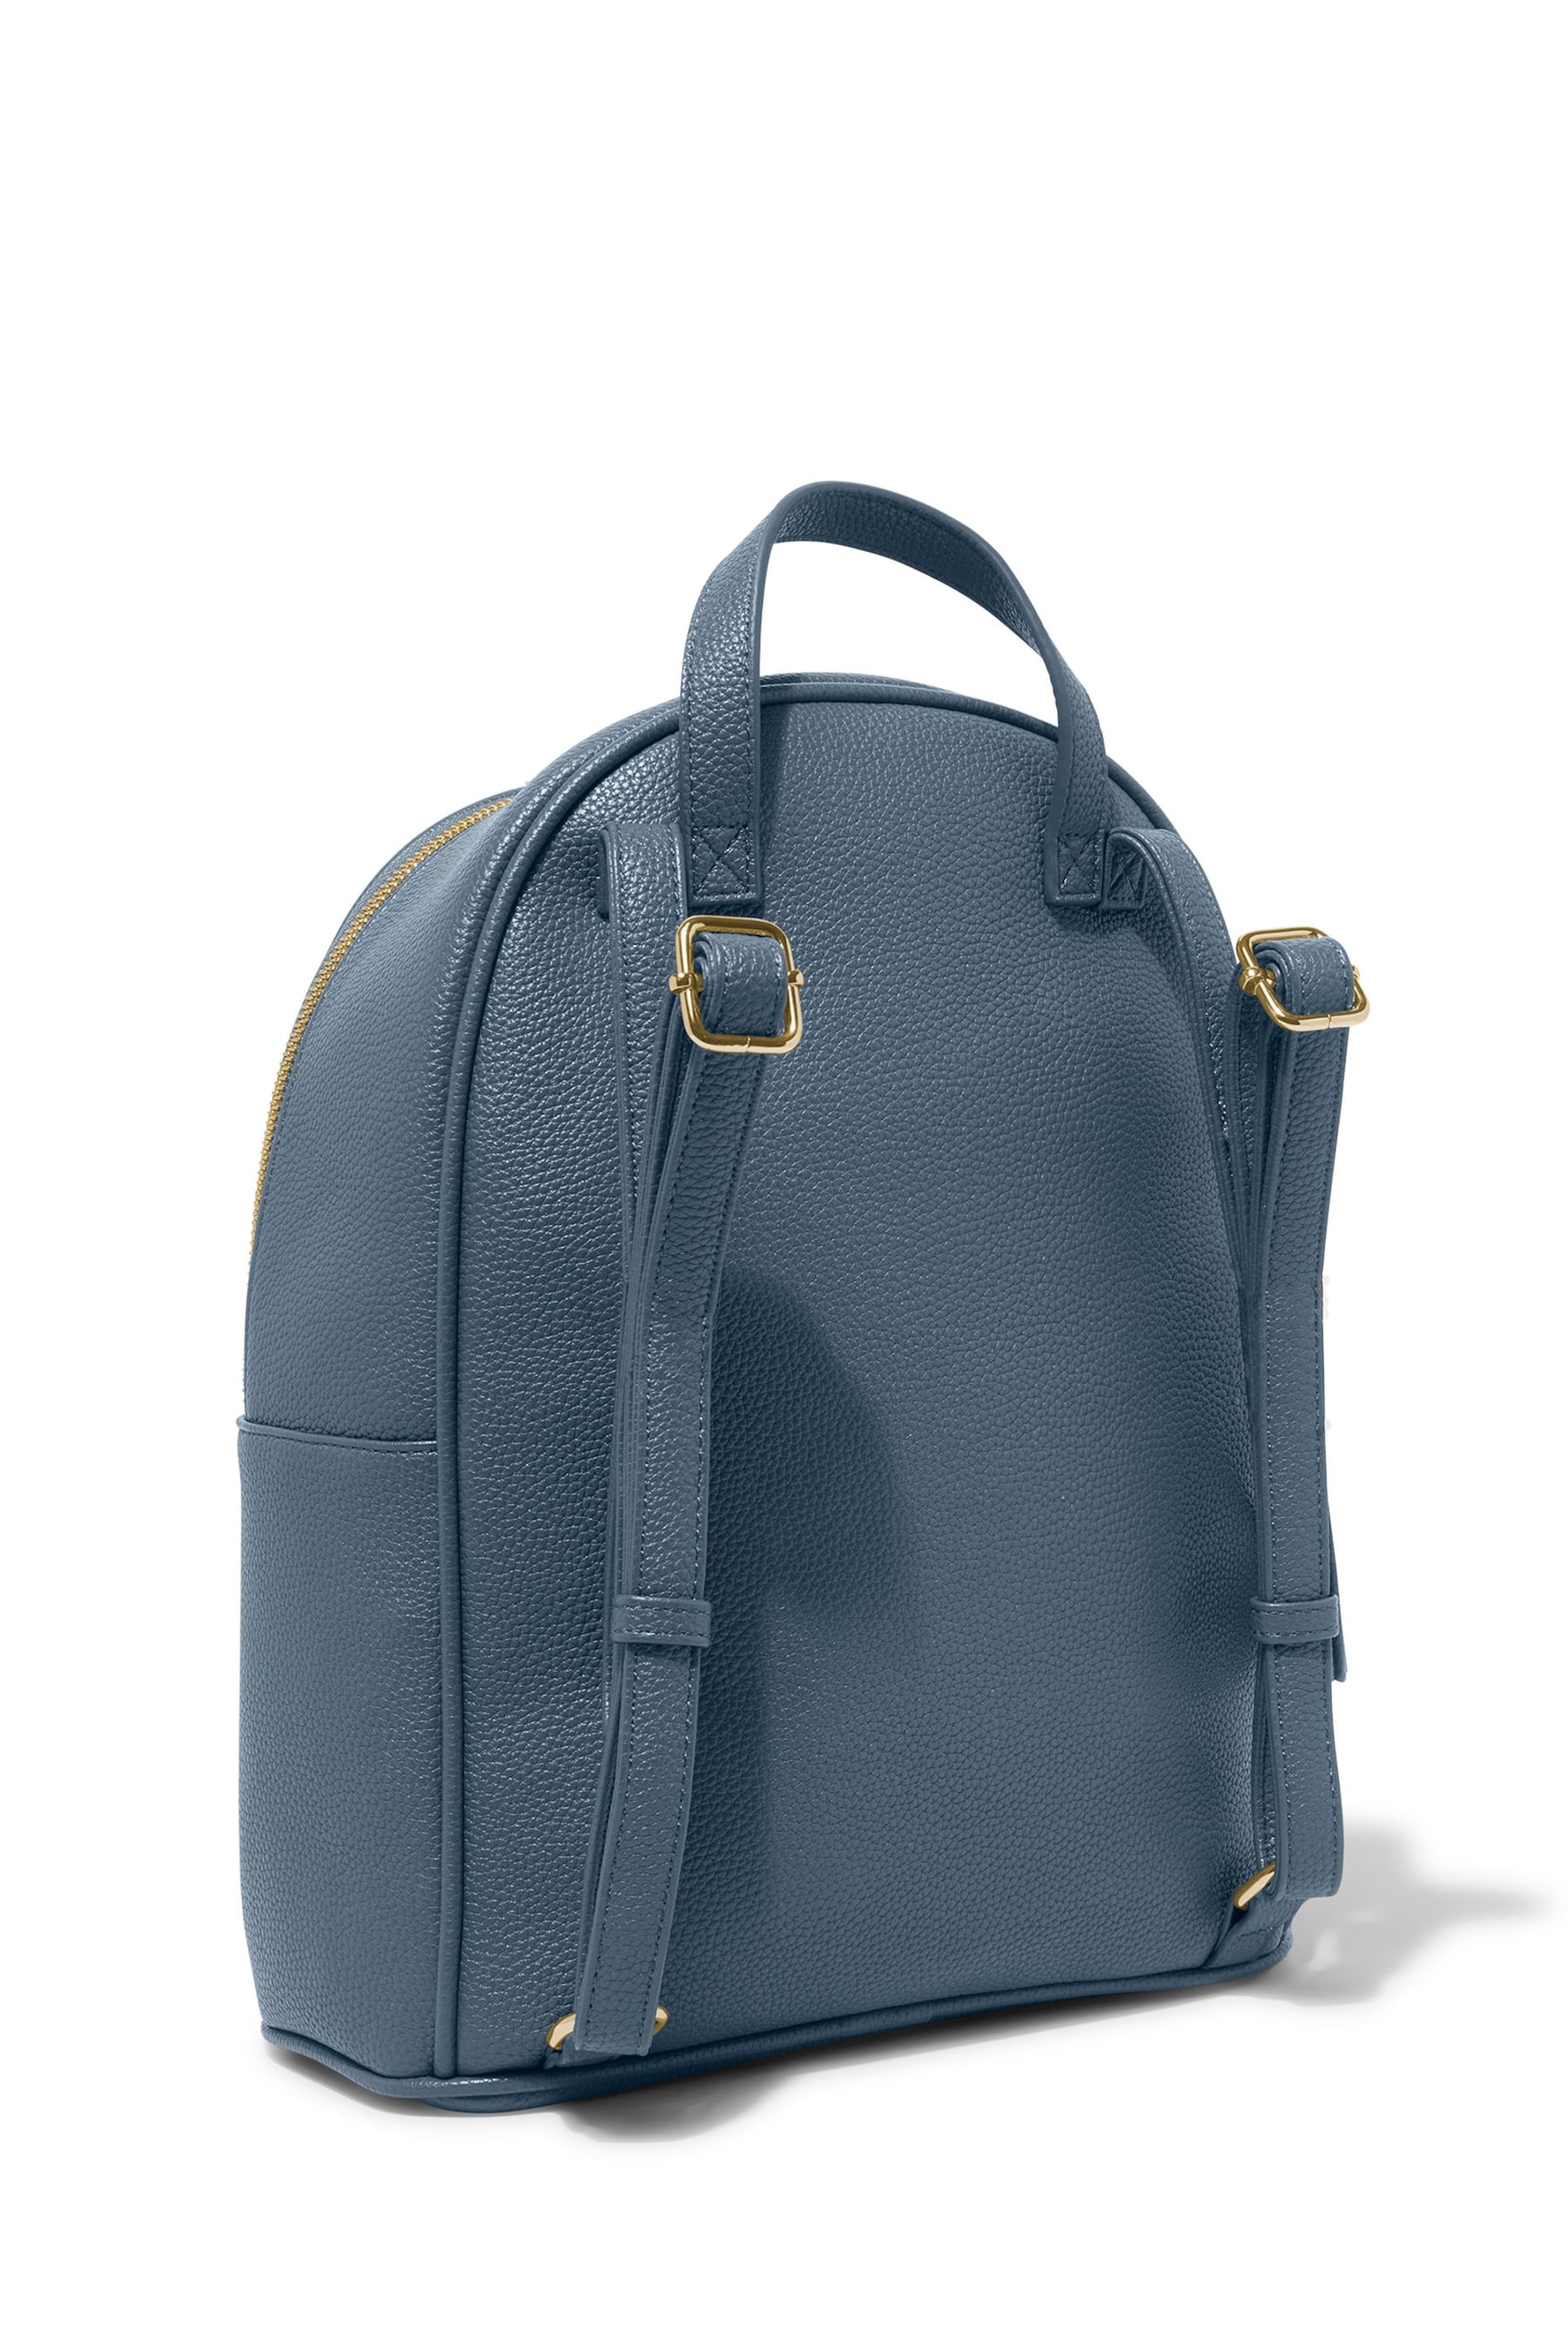 Katie Loxton Blue Cleo Large Backpack - Image 3 of 4